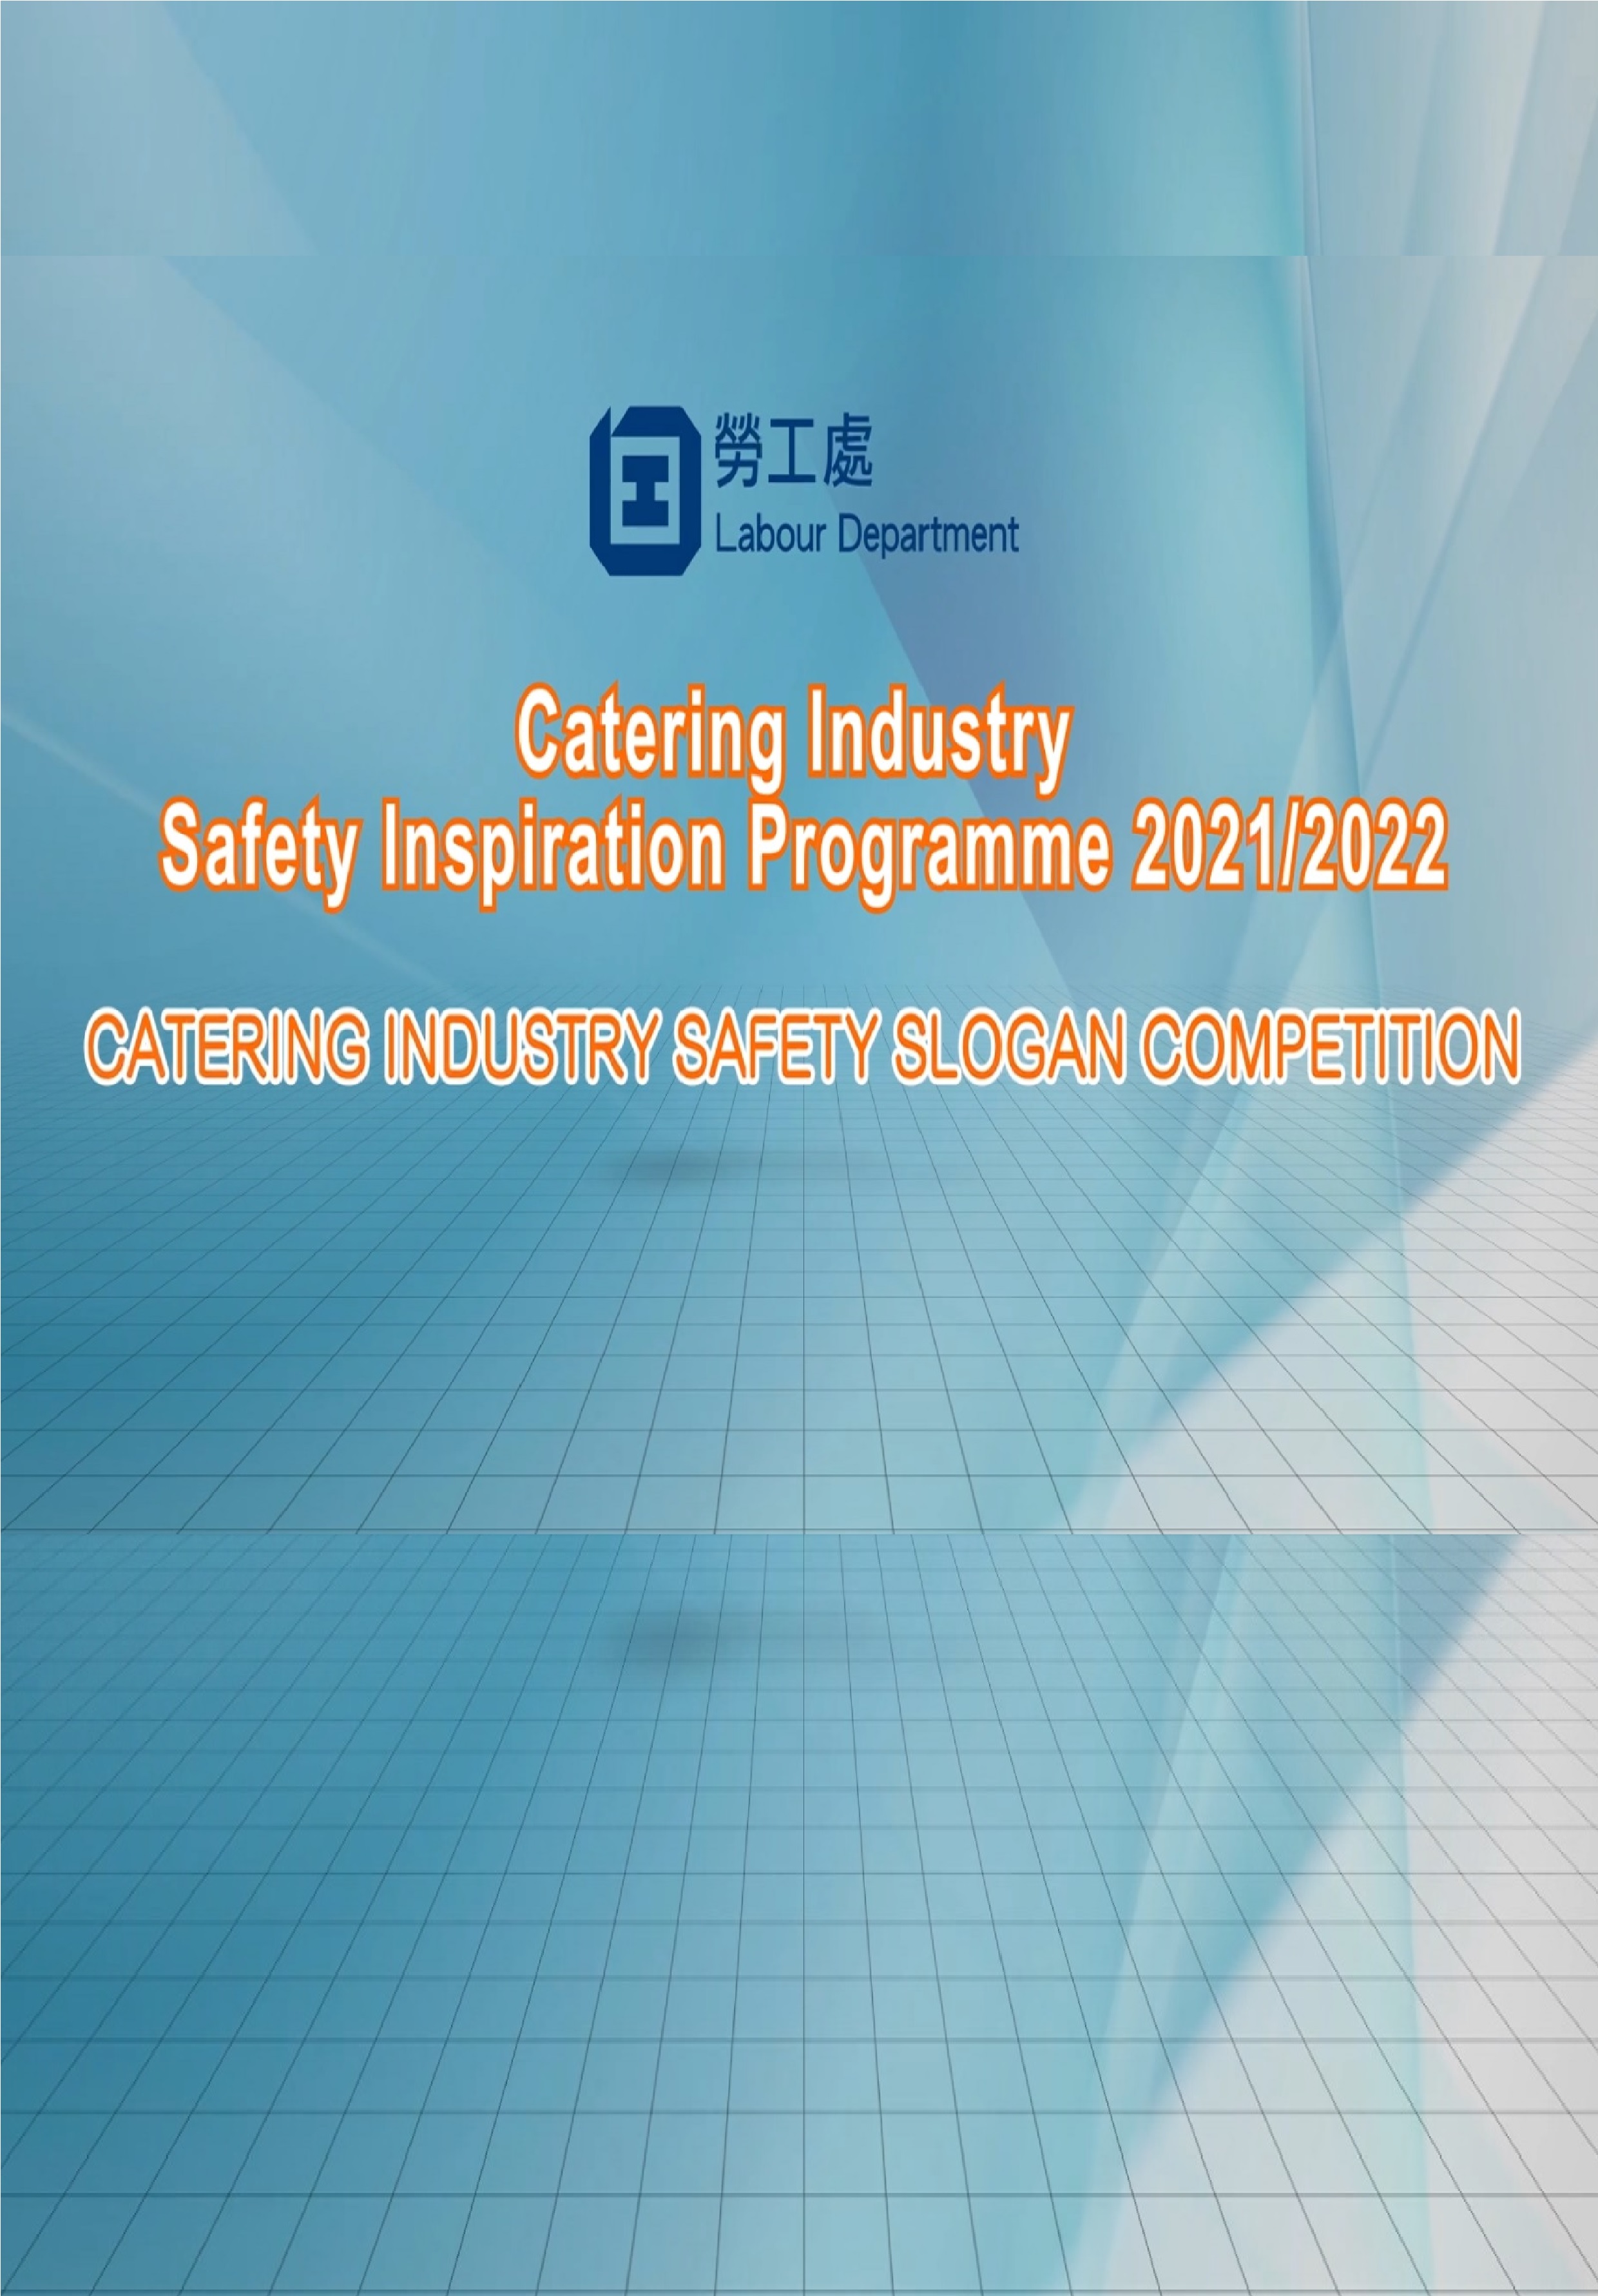 The Catering Industry Safety Inspiration Programme (2021/2022) – Catering Industry Safety Slogan Competition